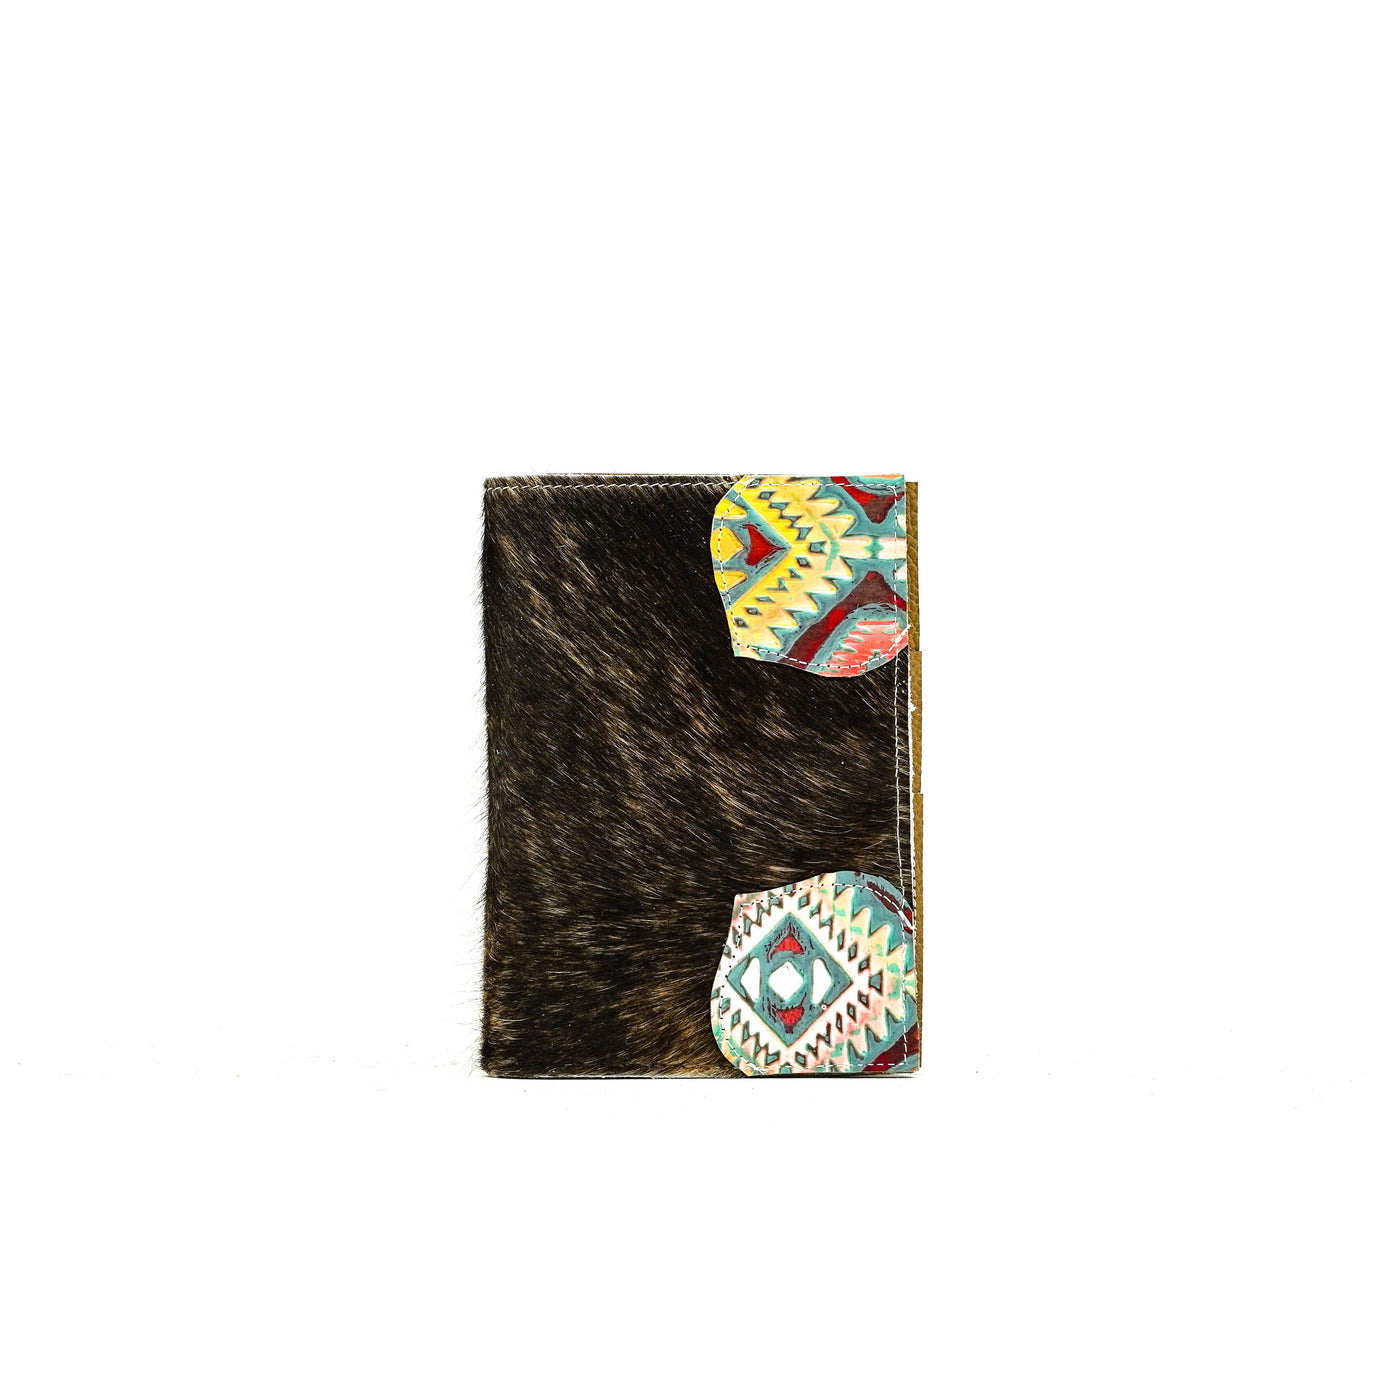 Small Notepad Cover - Dark Brindle w/ Rainbow Aztec-Small Notepad Cover-Western-Cowhide-Bags-Handmade-Products-Gifts-Dancing Cactus Designs